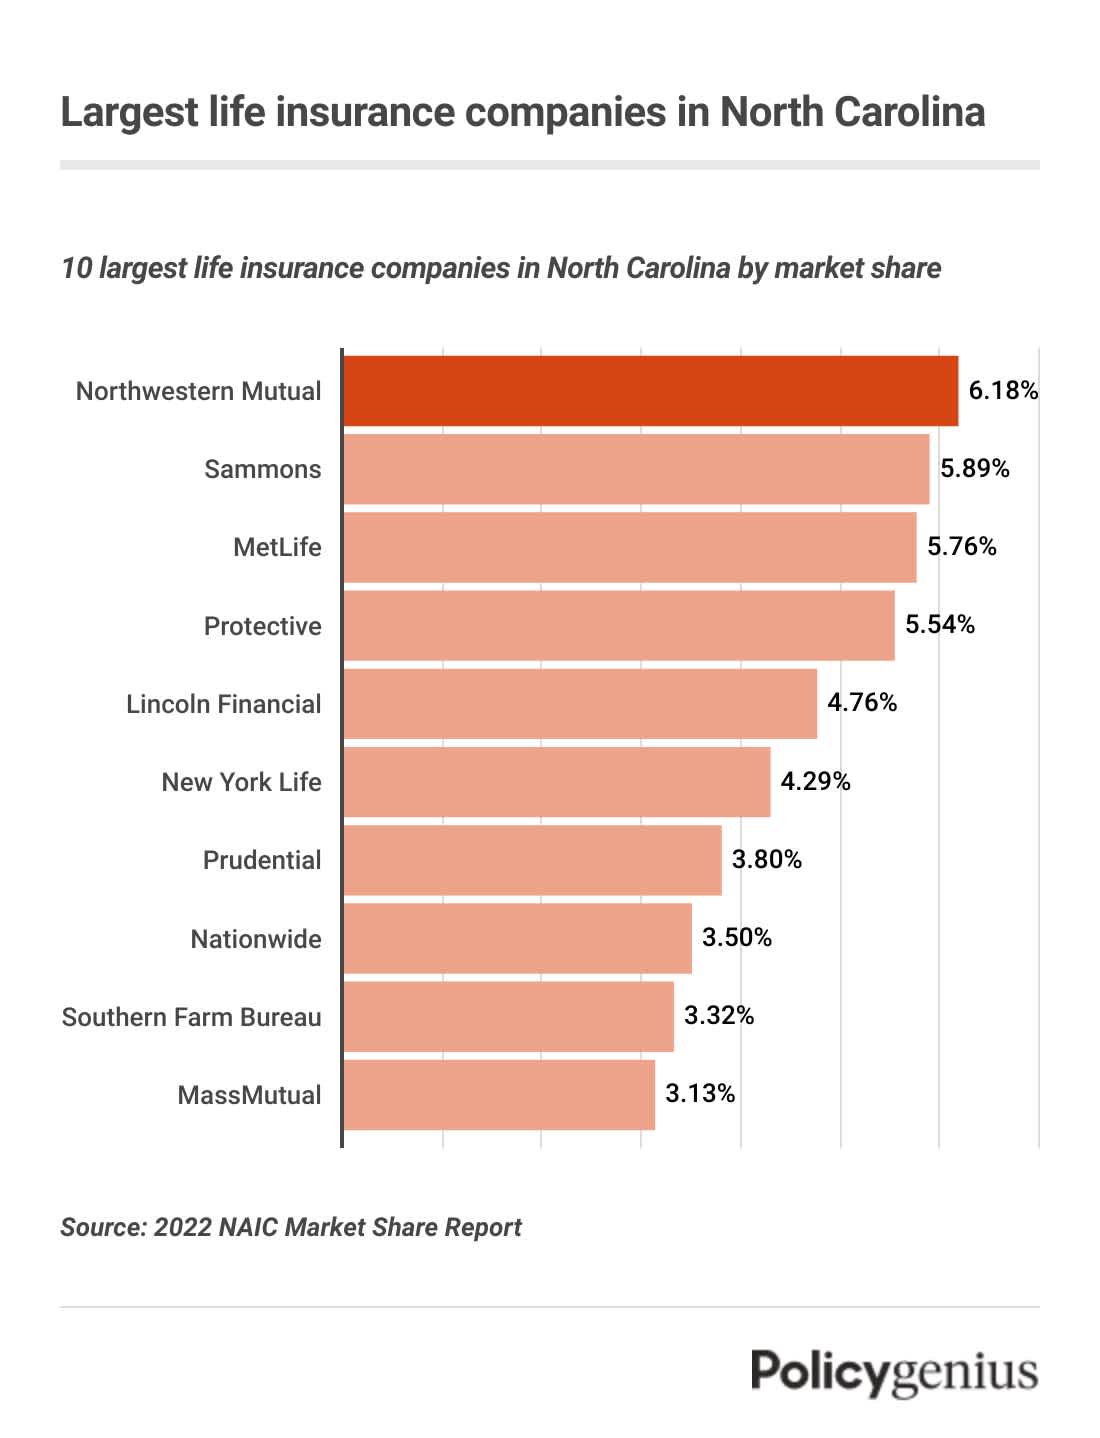 A bar graph of the largest life insurance companies by market share in North Carolina. The largest company is Northwestern Mutual.